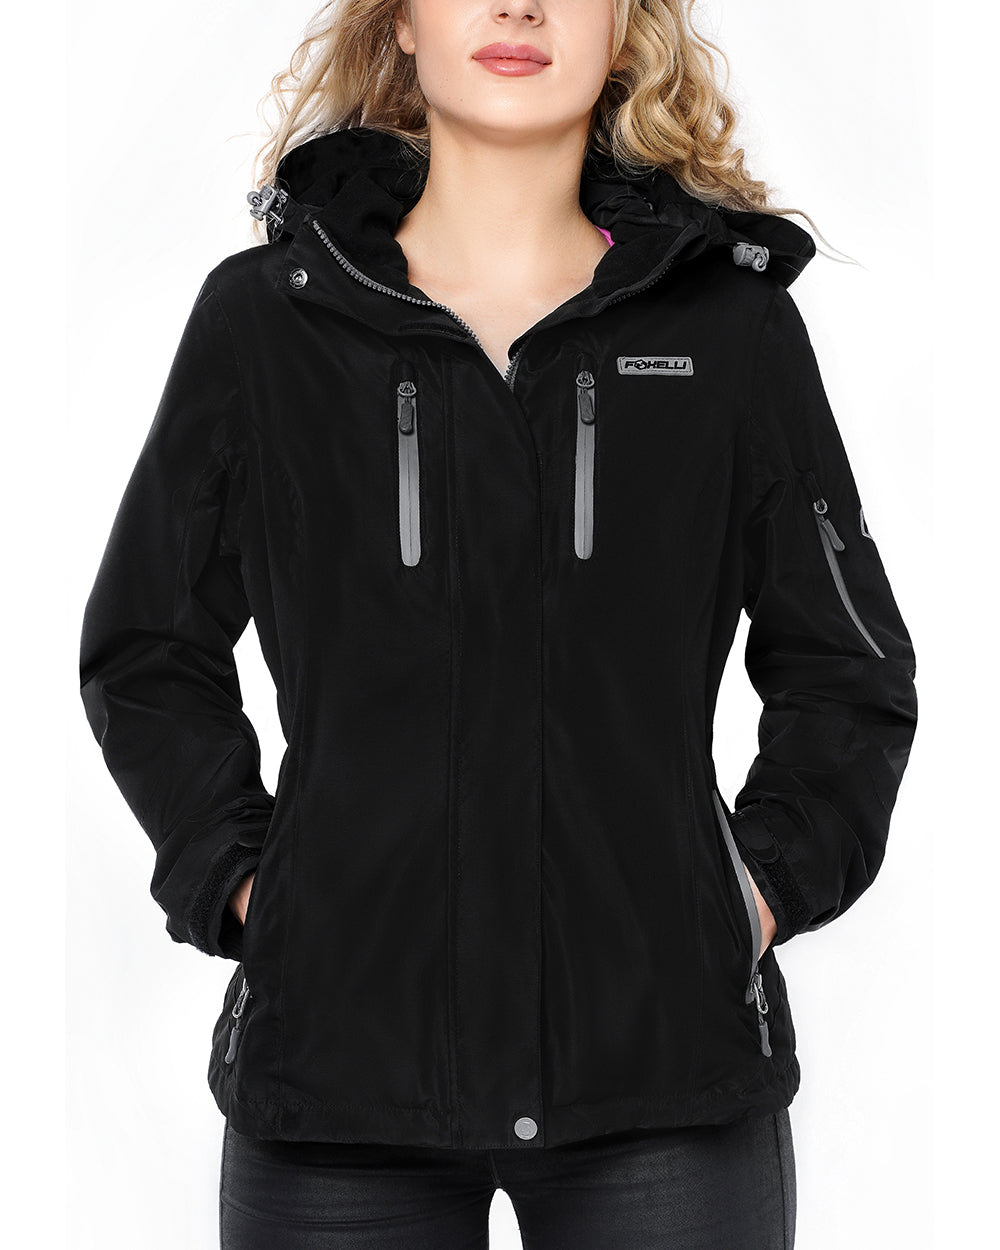 Winter Hiking Jackets for Women - Down Jackets & Synthetic Jackets | Winter  Jackets | Winter hiking, Hiking jacket, Hiking jacket women